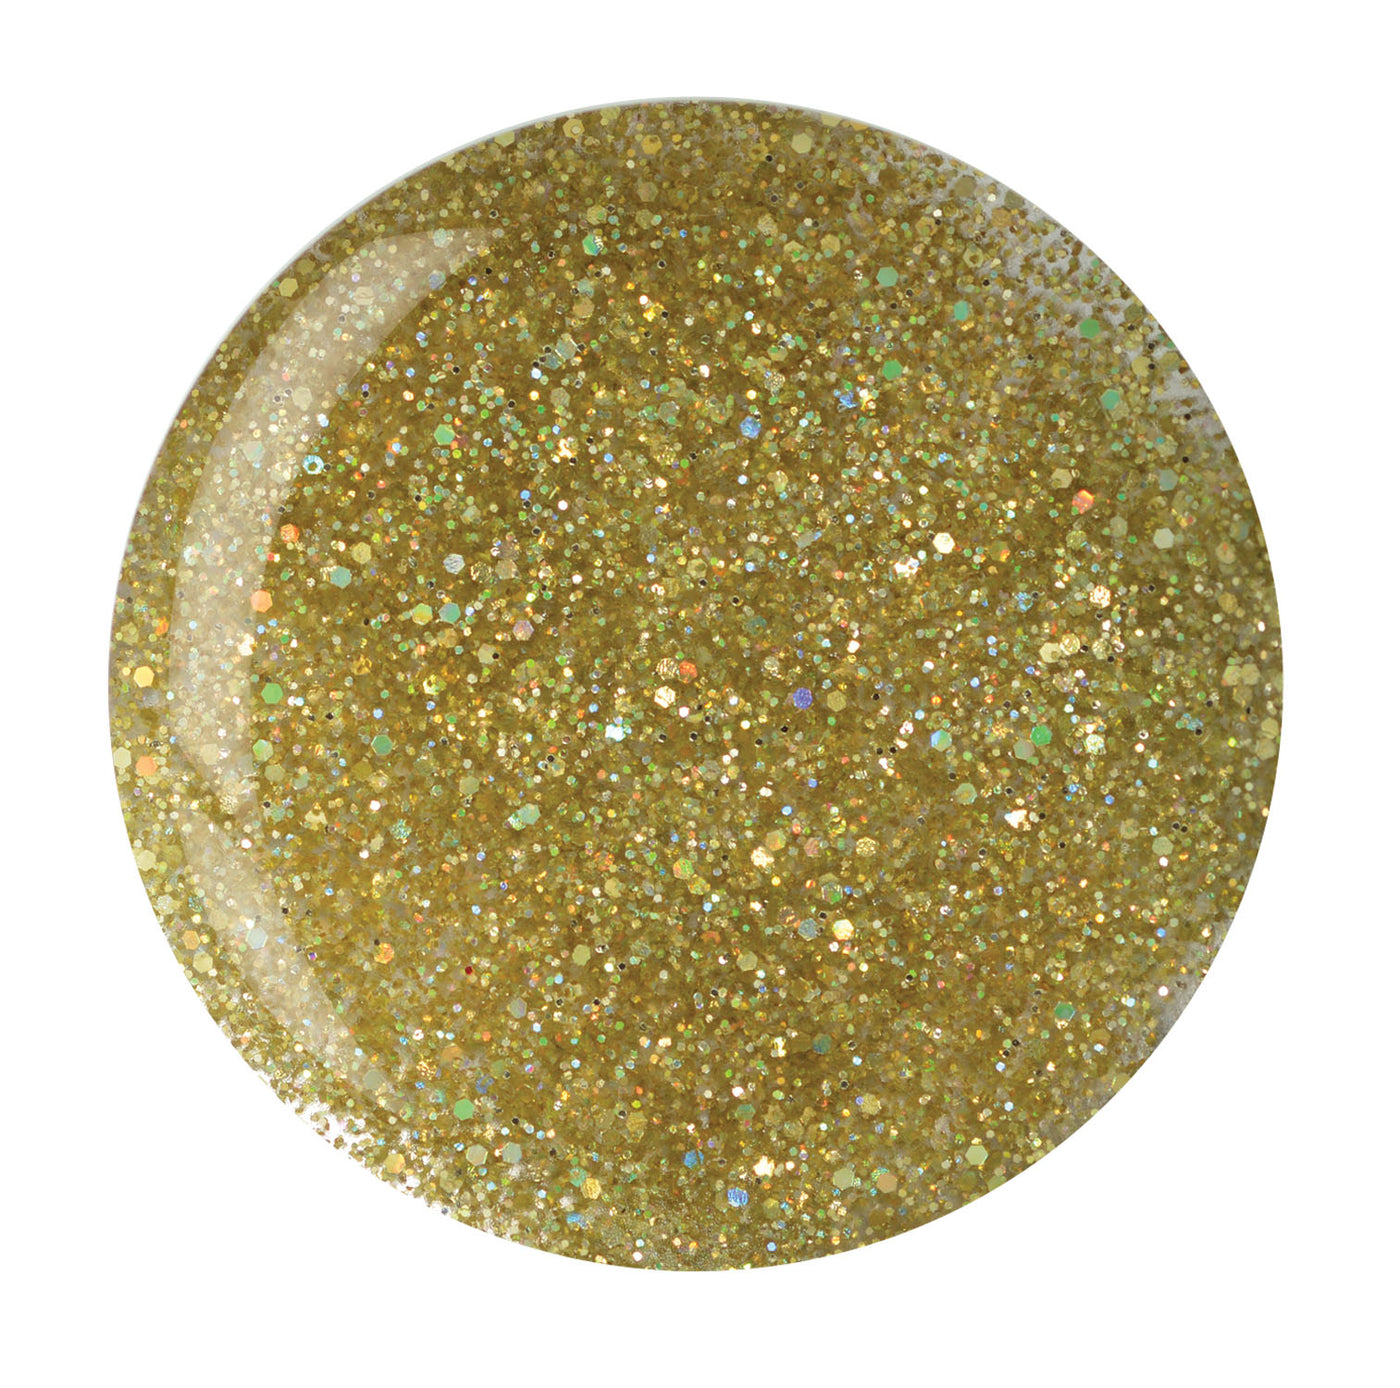 CP Dipping Powder14g - 5569-5 Gold Glitter W/ Large & Small